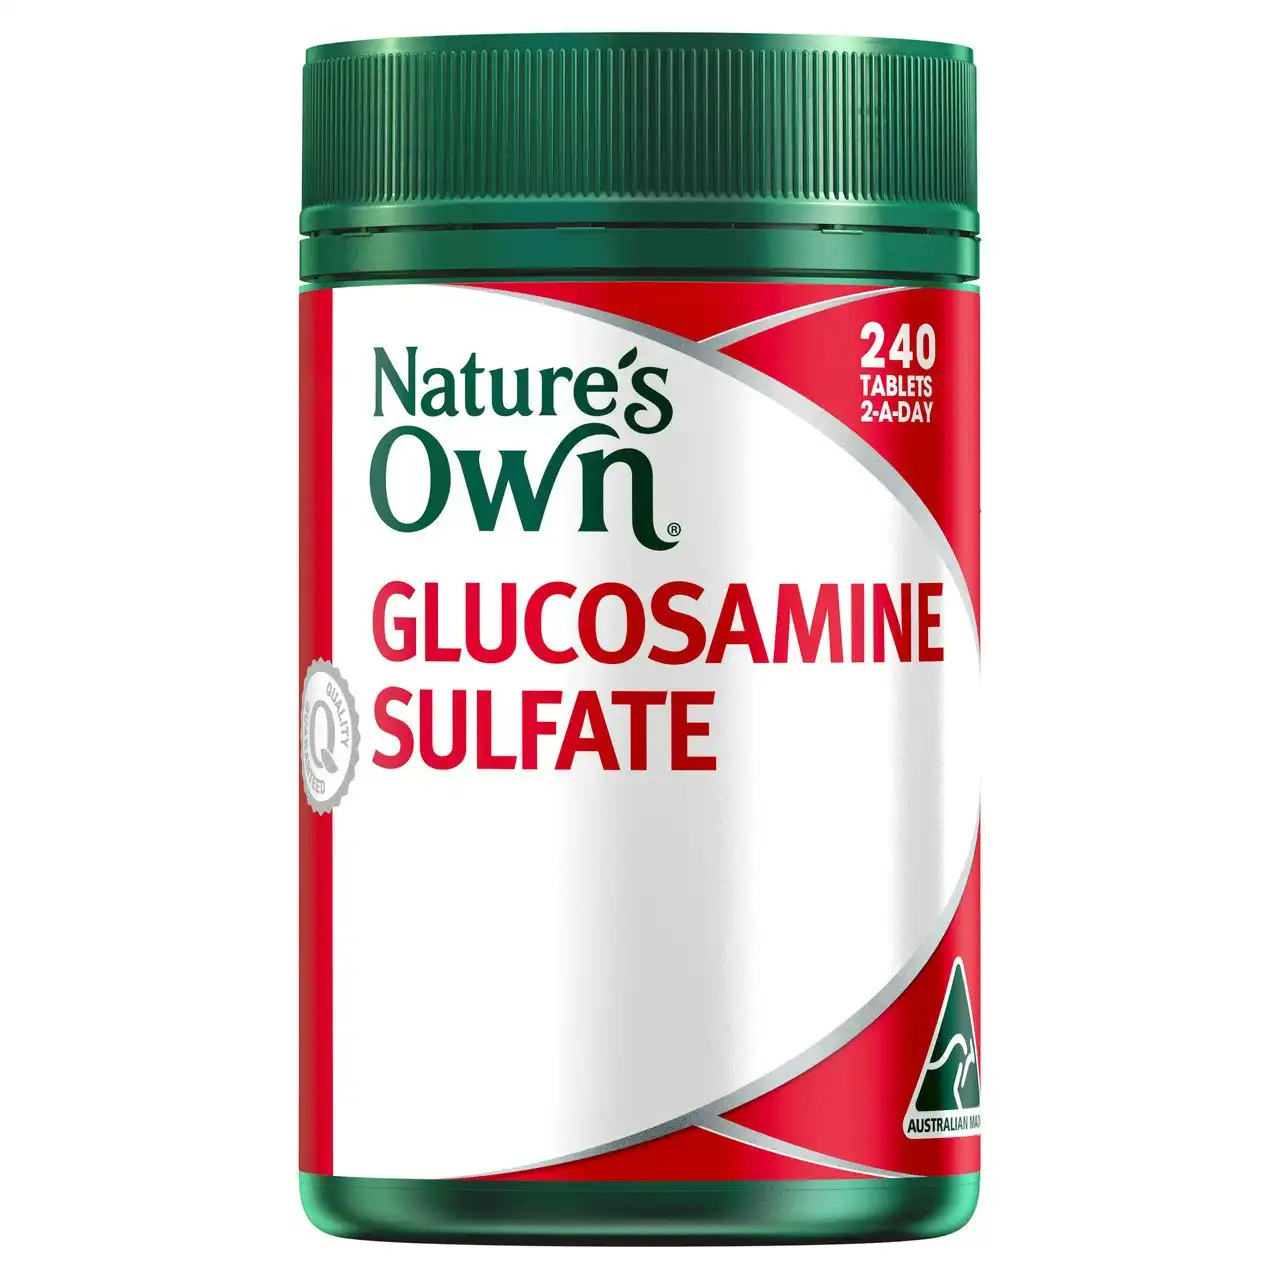 Nature's Own Glucosamine Sulfate 240 Tablets